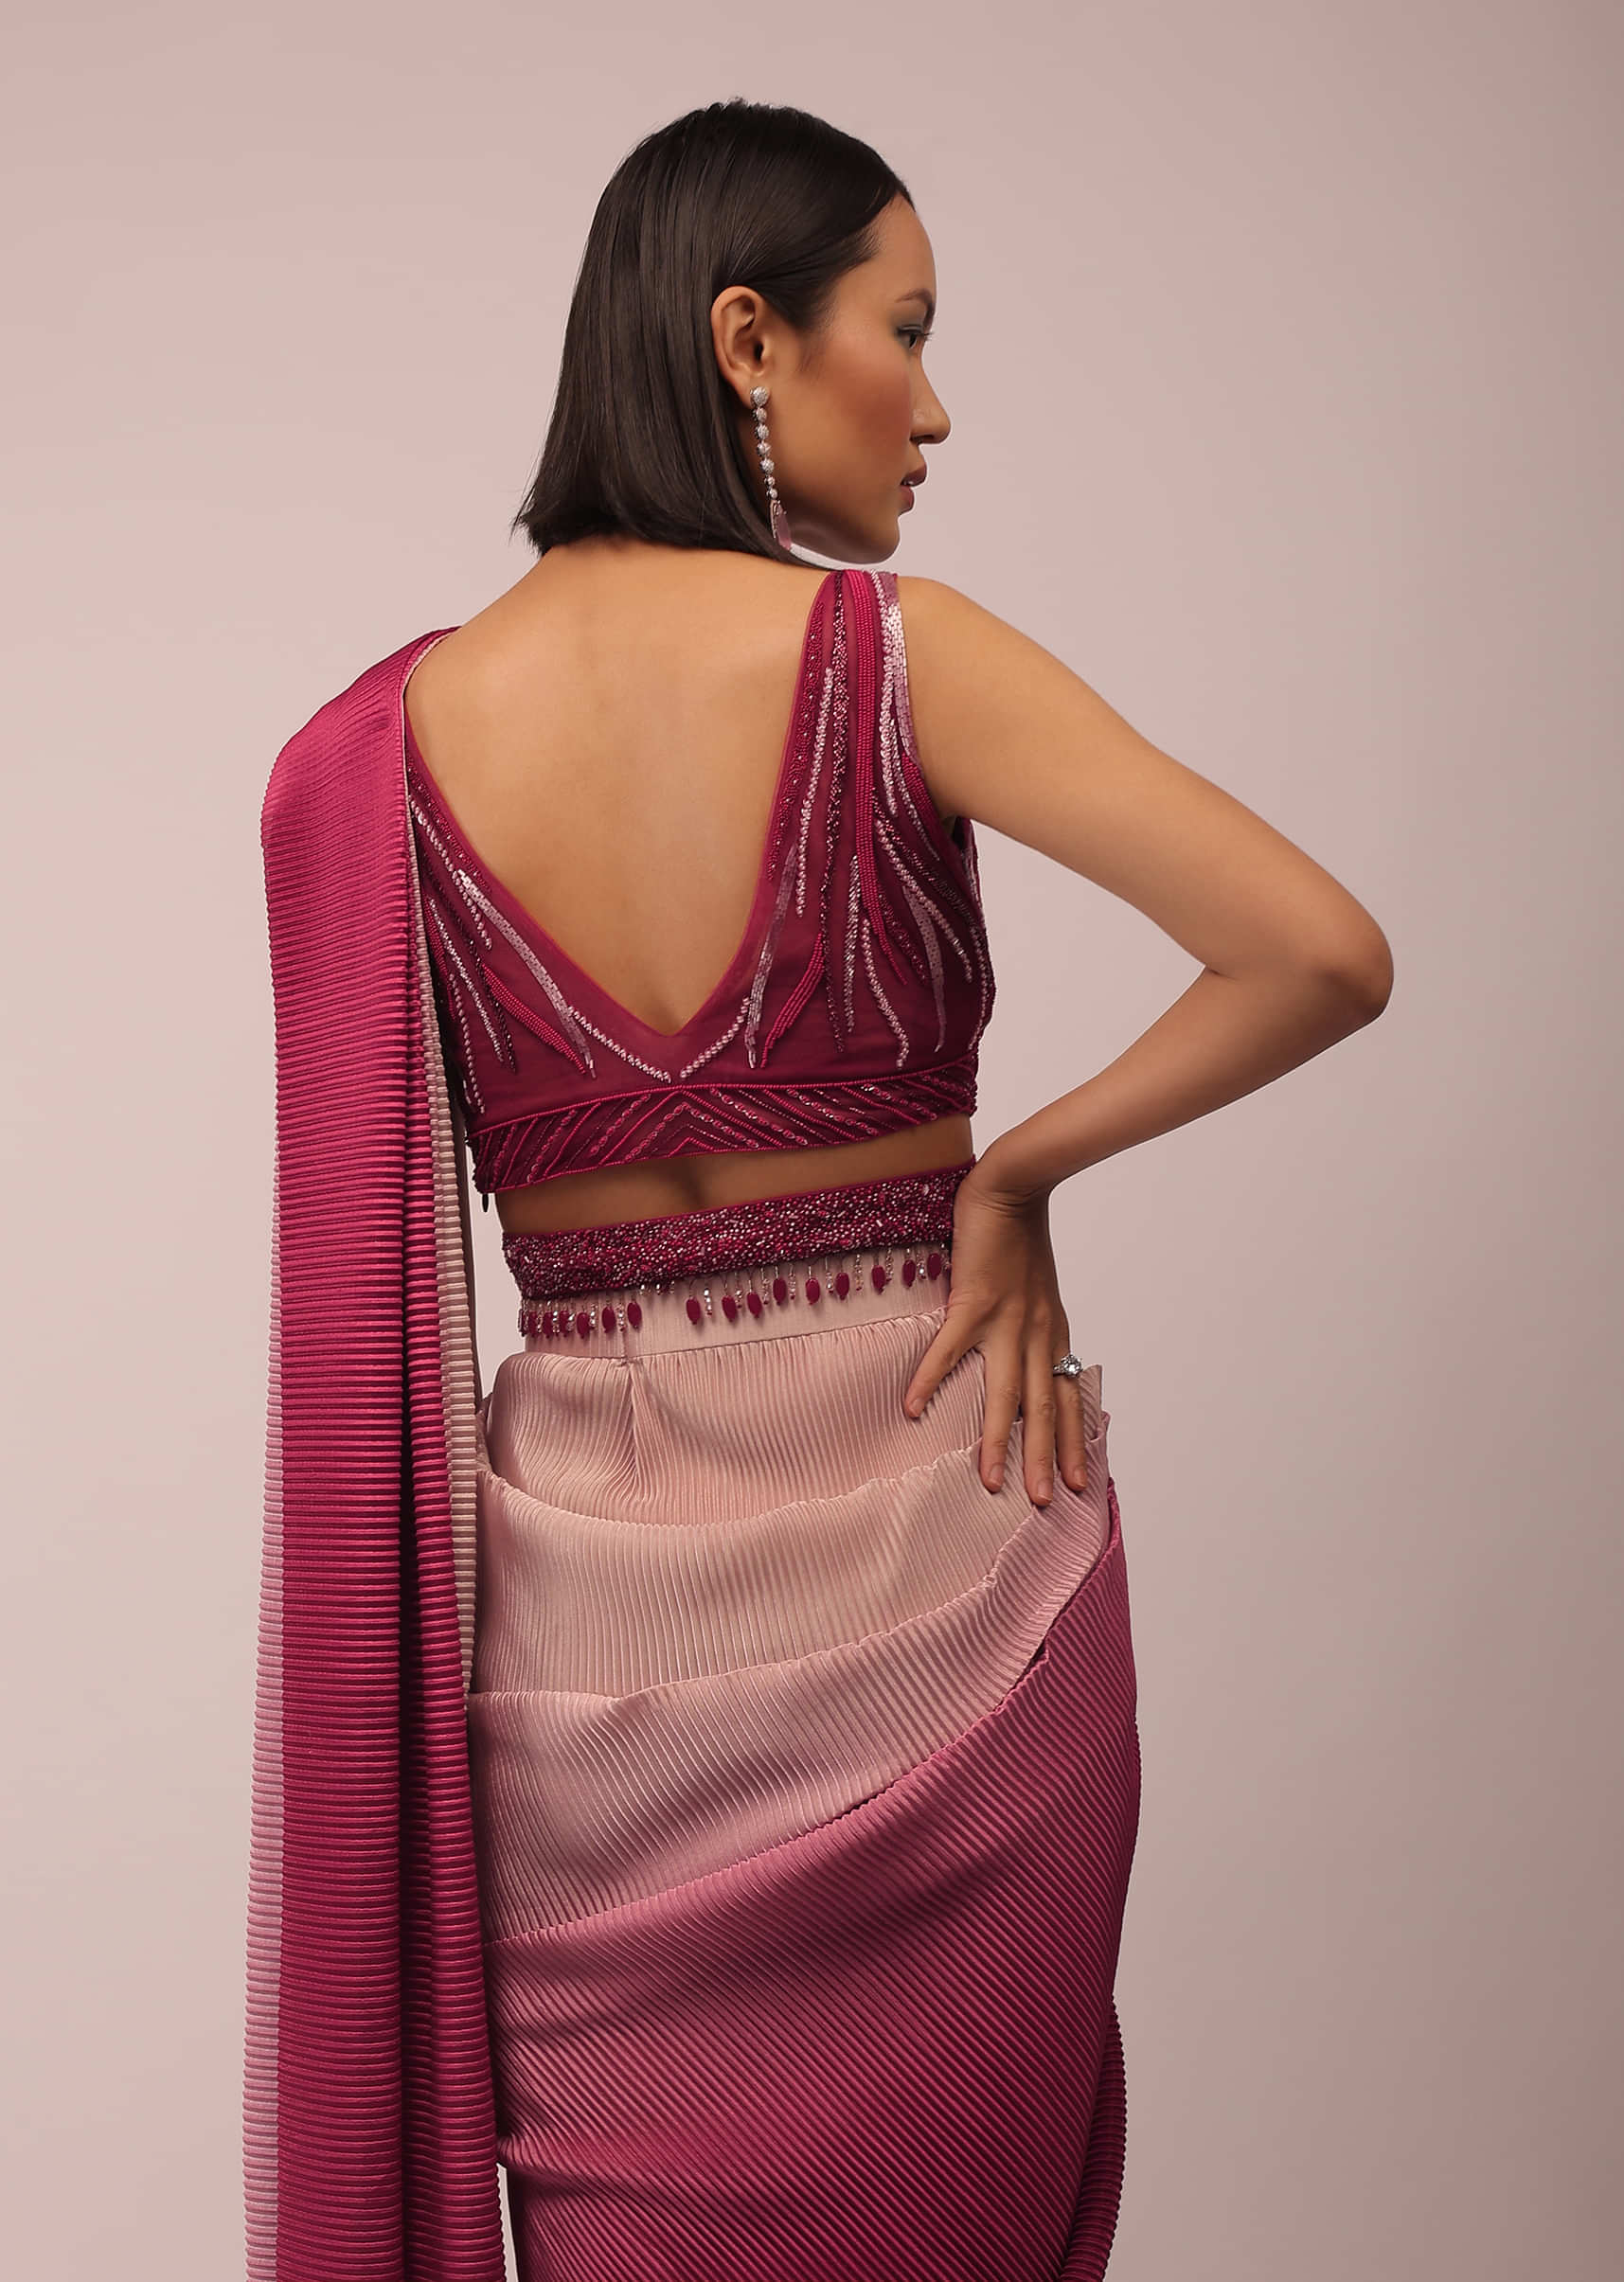 Cherry Red Ombre Ready-Pleated Saree Crafted In The Crush, It Is Paired With The Crop Top In Cut Dana Embroidery